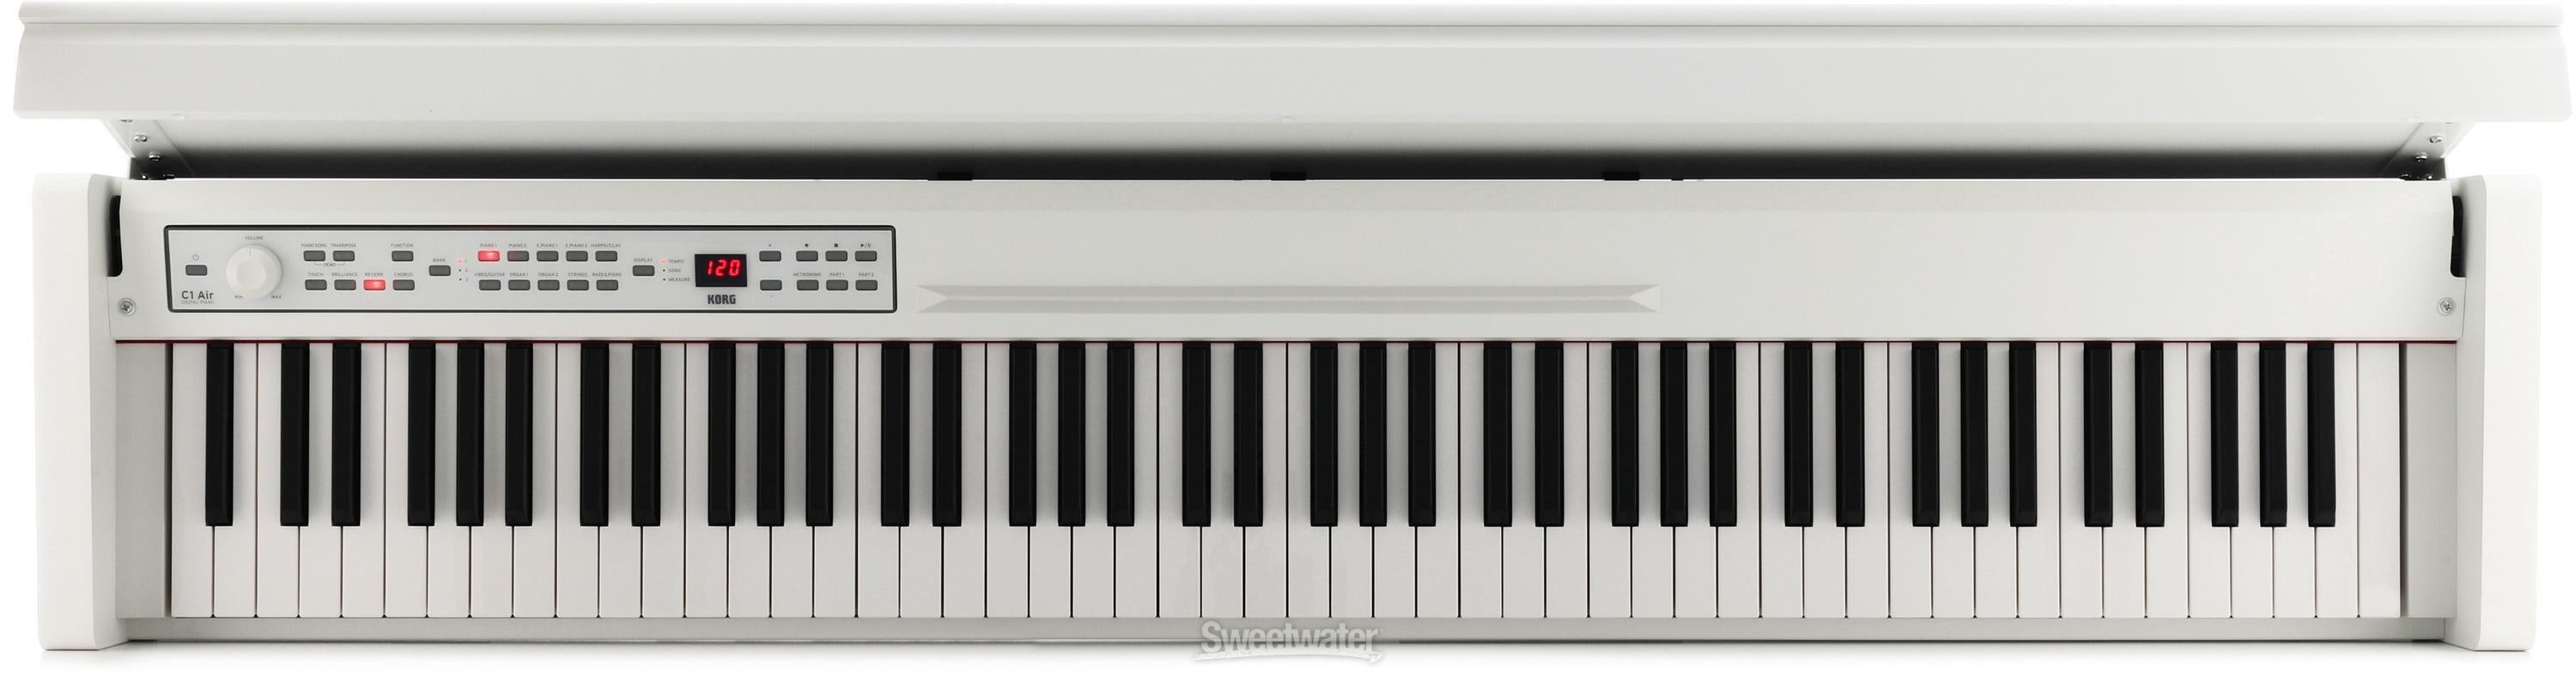 Korg C1 Air Digital Piano with Bluetooth - White | Sweetwater